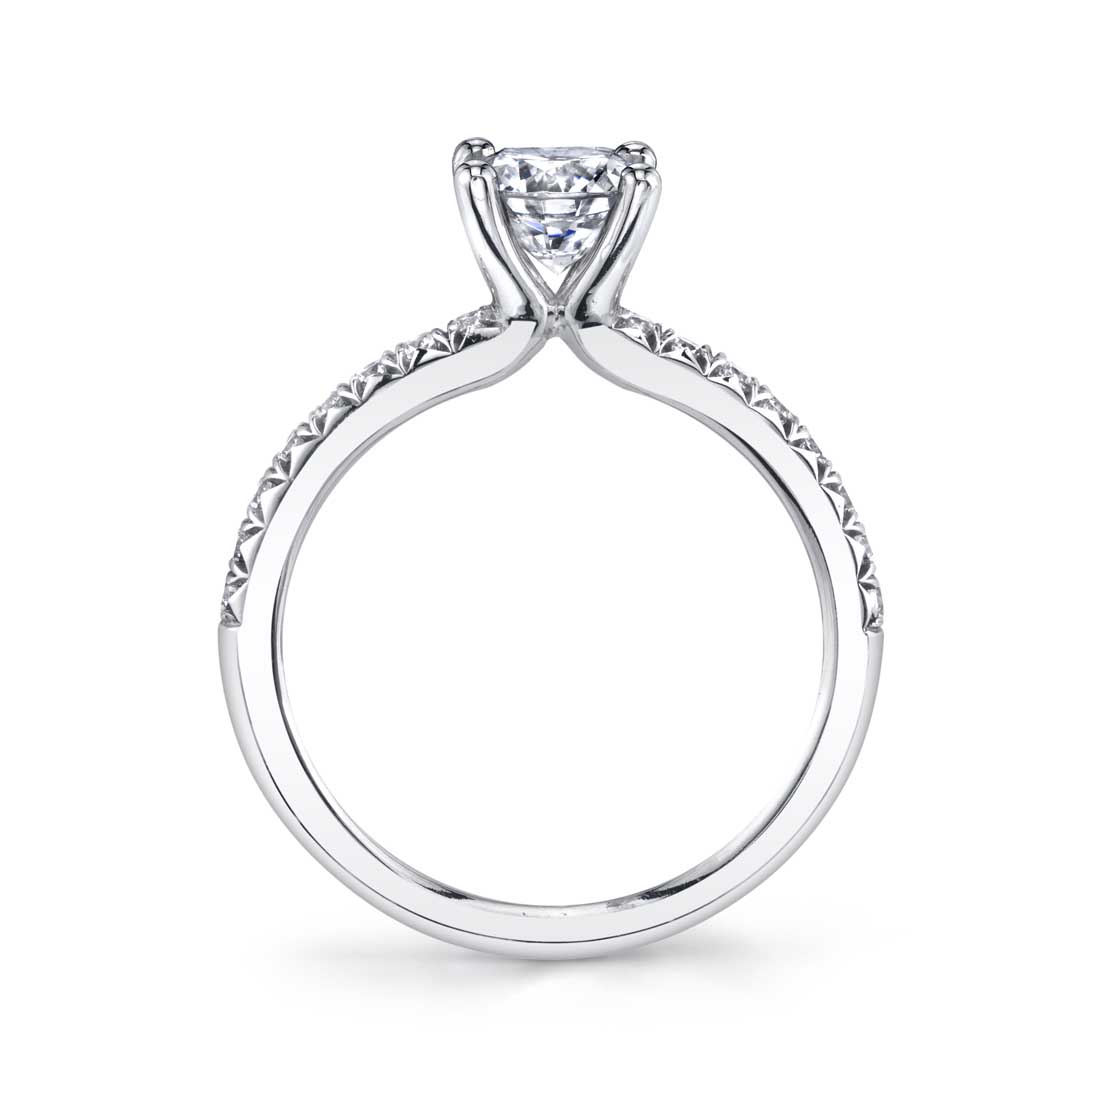 Profile Image of a Classic Engagement Ring